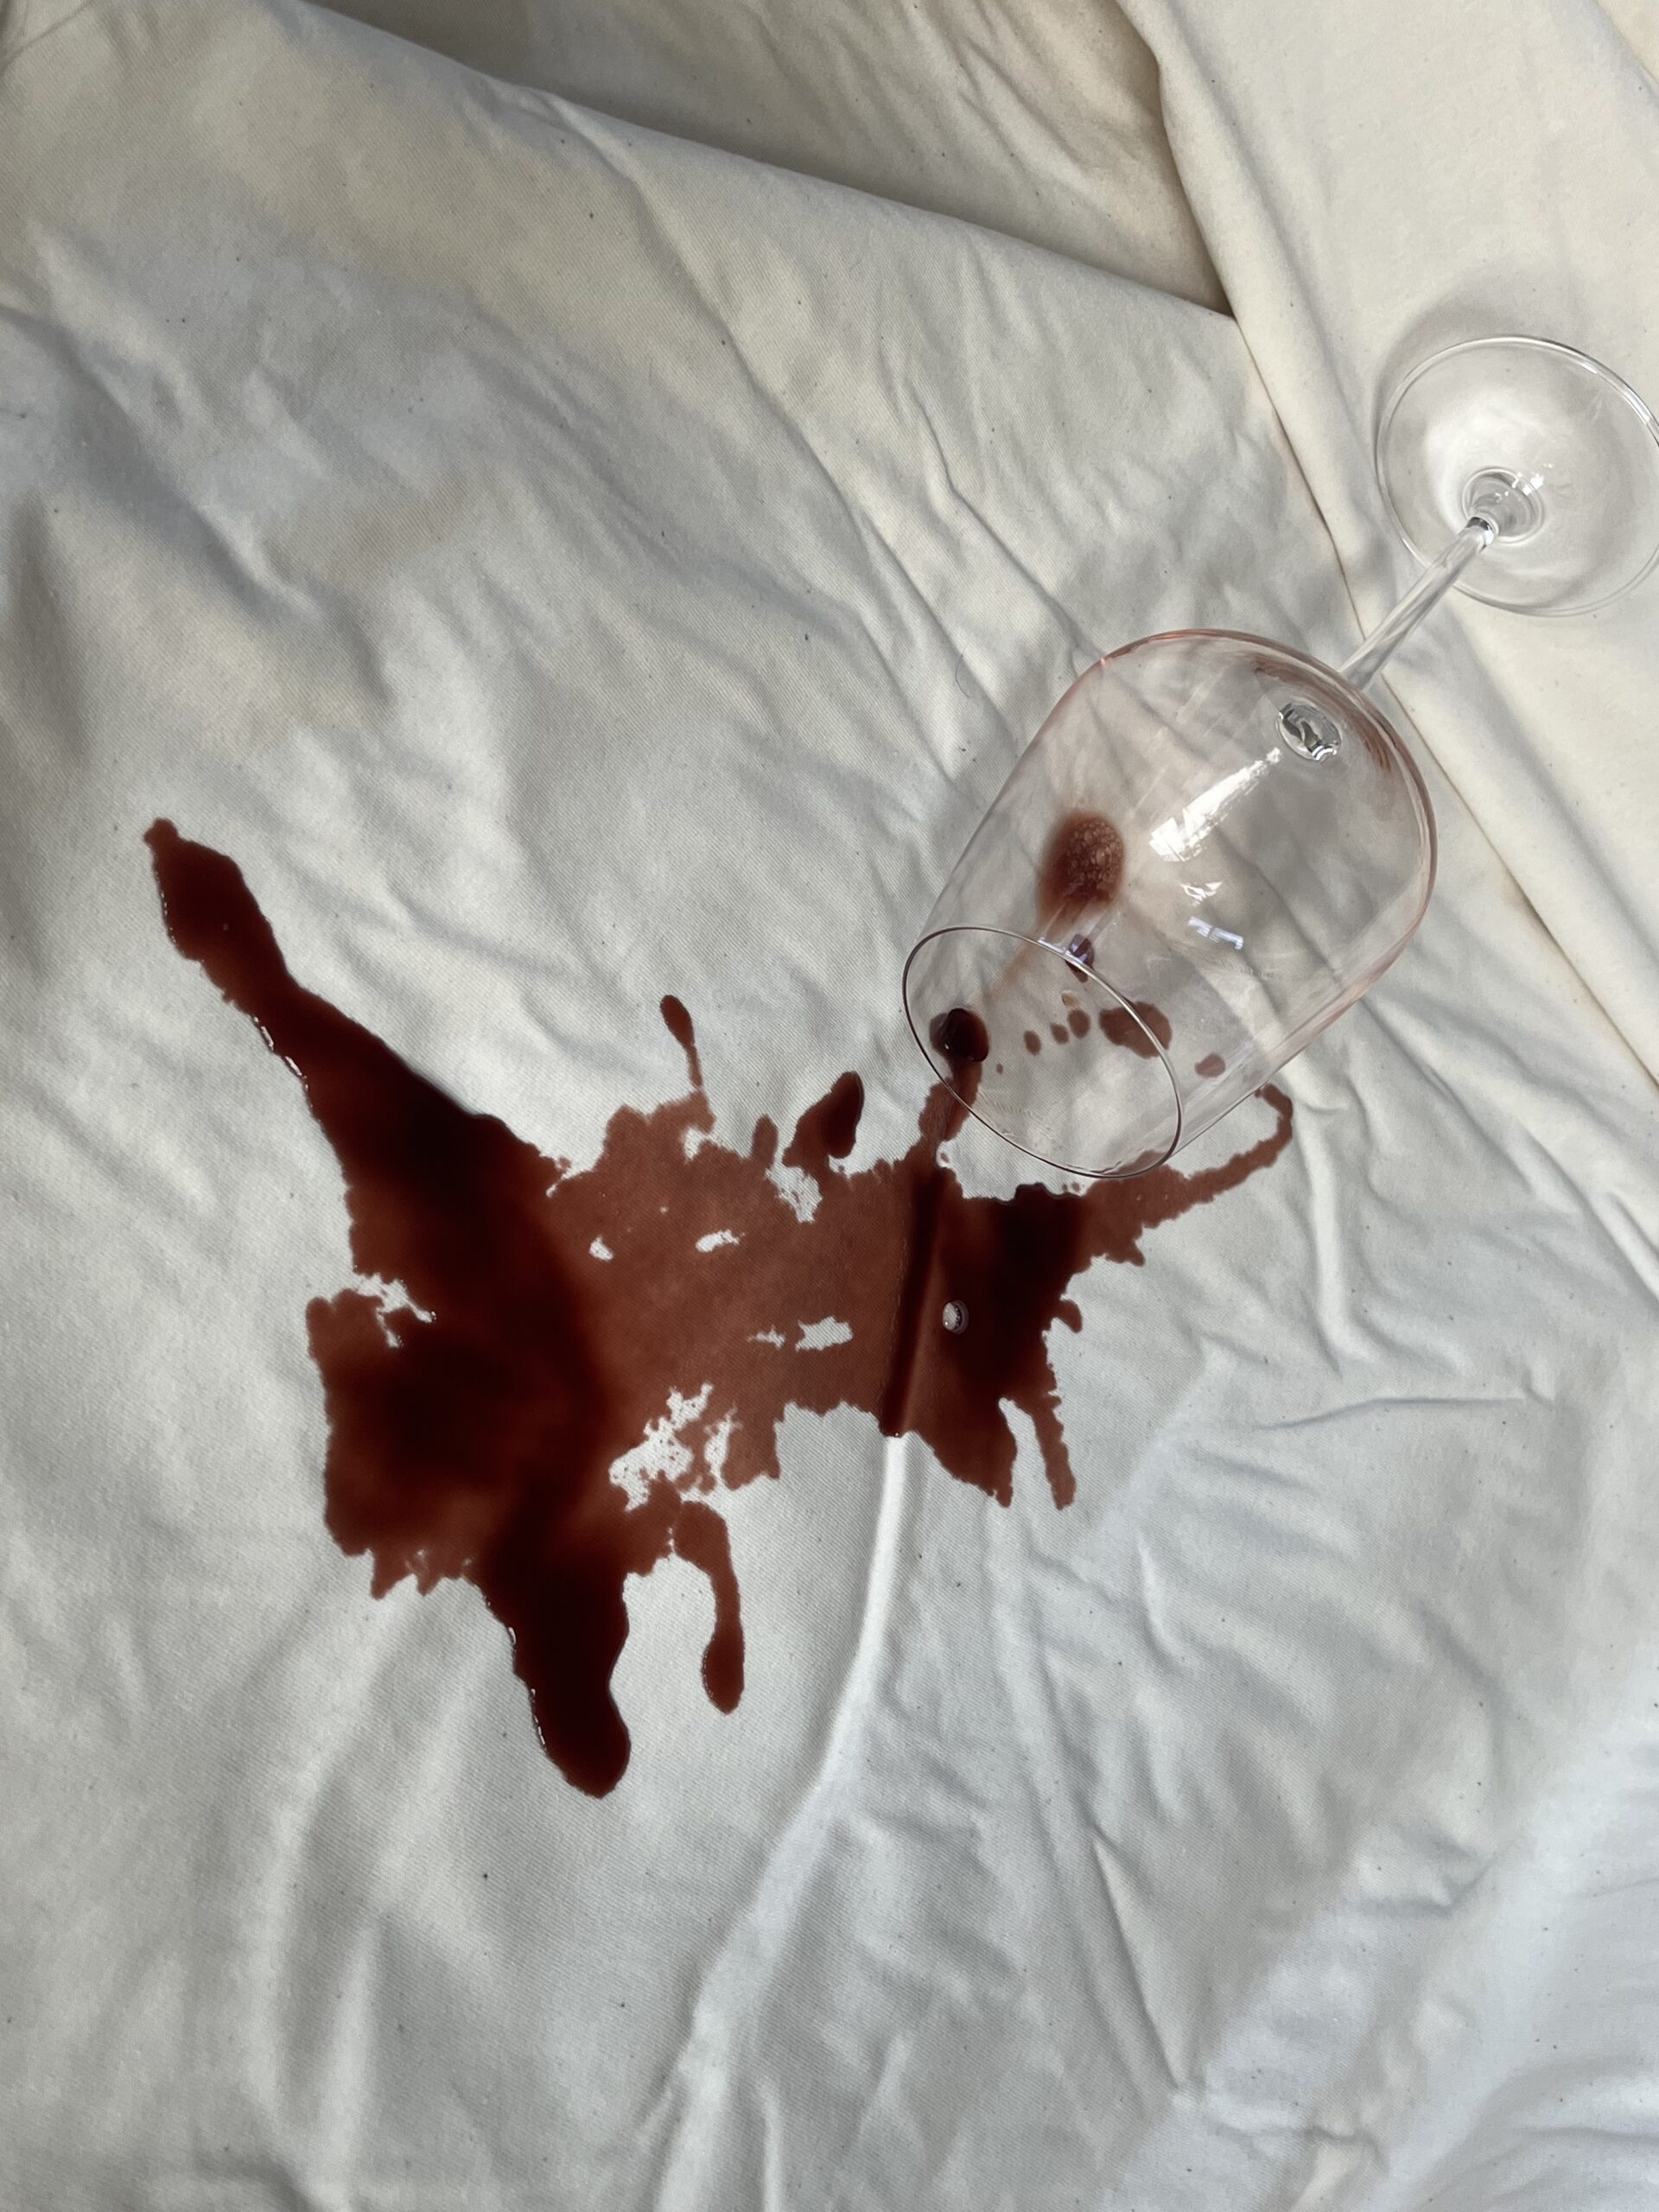 A wine spill on the mattress protector from Birch